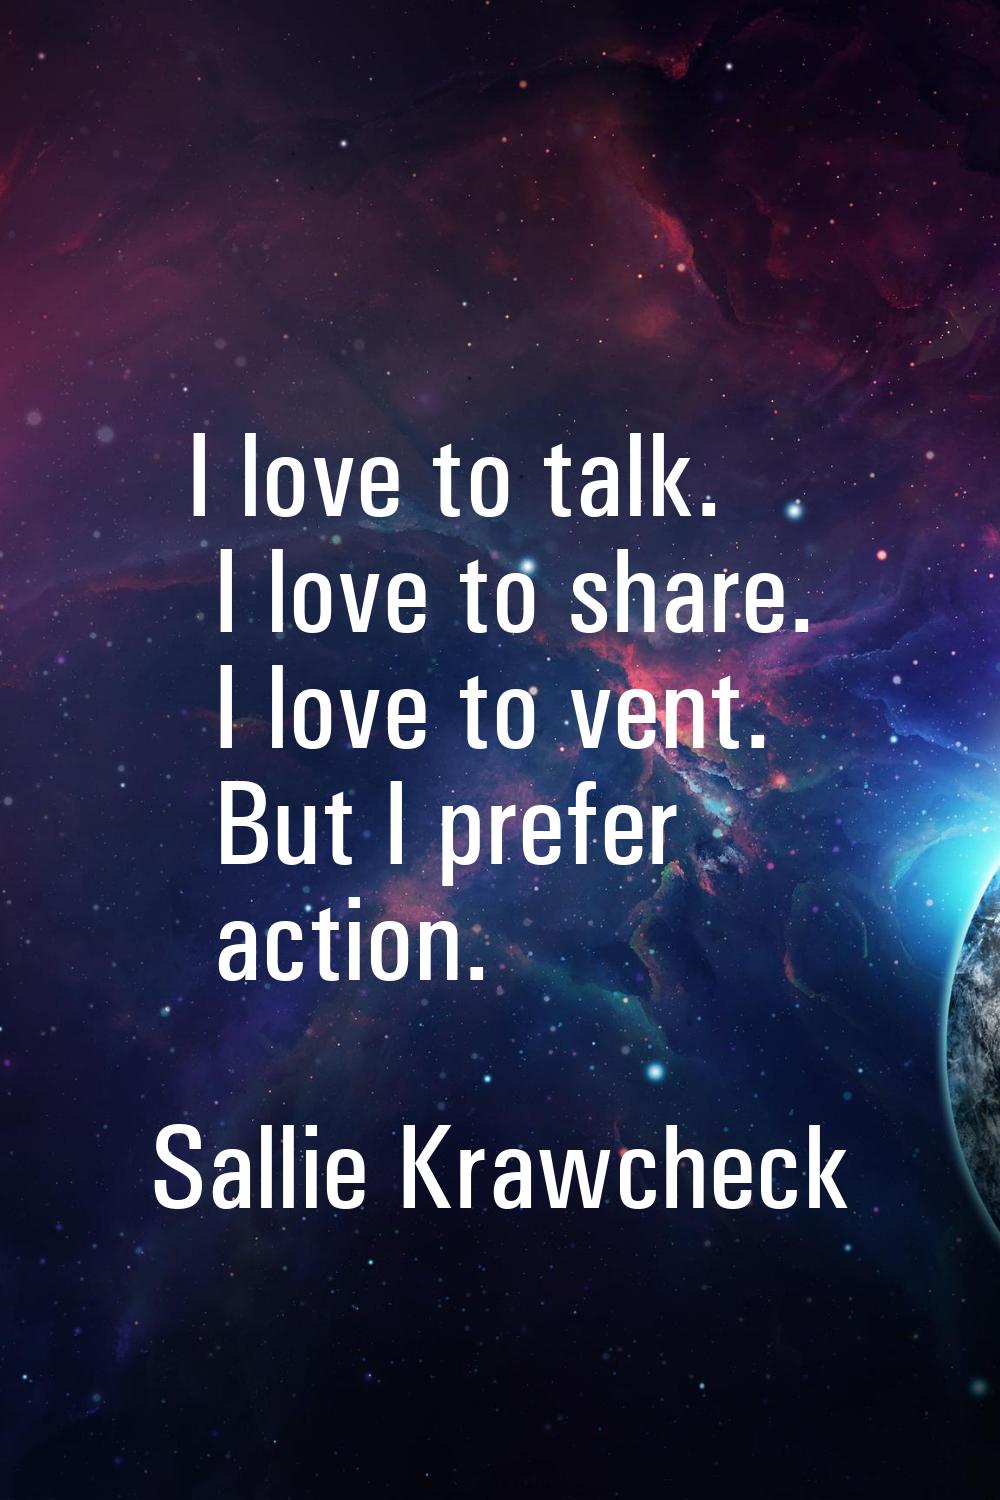 I love to talk. I love to share. I love to vent. But I prefer action.